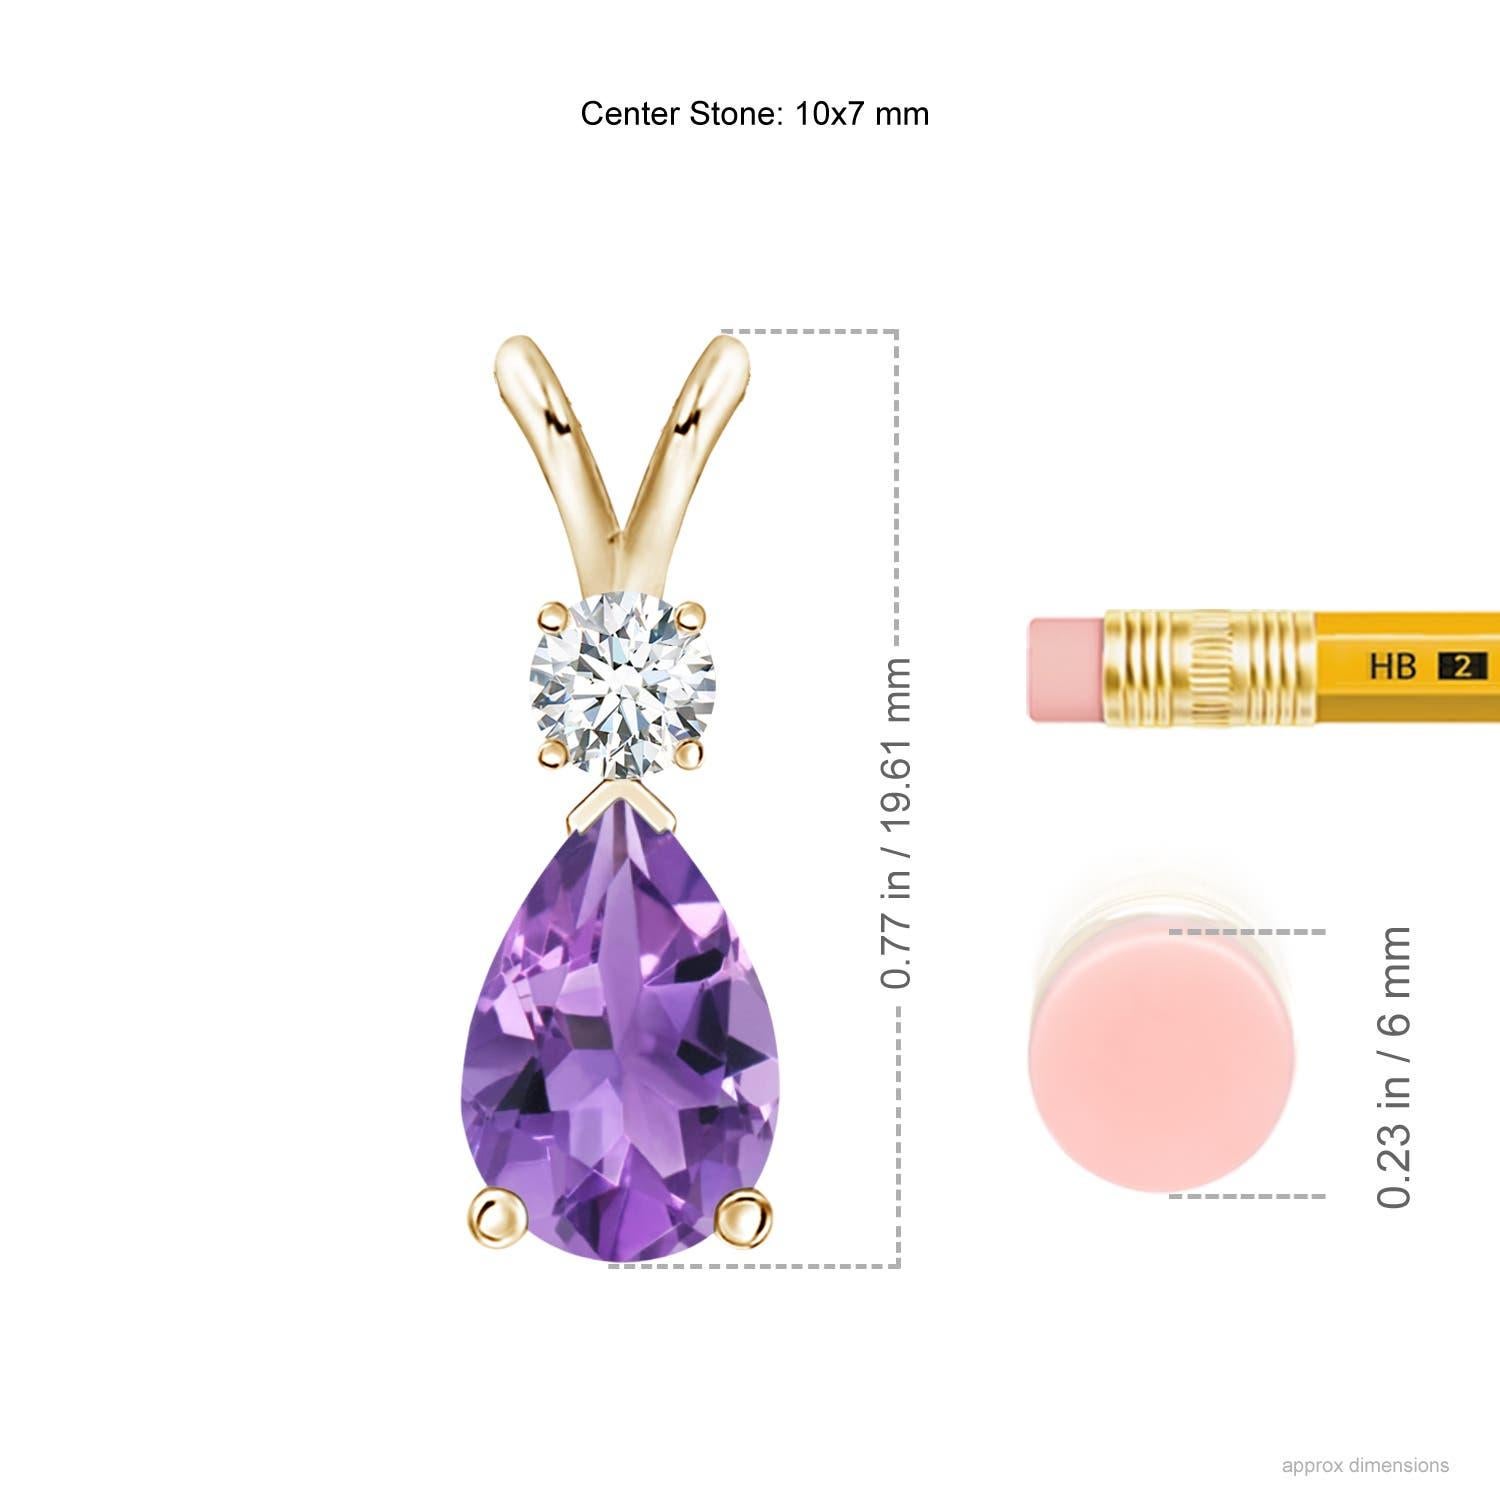 A pear-shaped deep purple amethyst is secured in a prong setting and embellished with a diamond accent on the top. Simple yet stunning, this teardrop amethyst pendant with V bale is sculpted in 14k yellow gold.
Amethyst is the Birthstone for